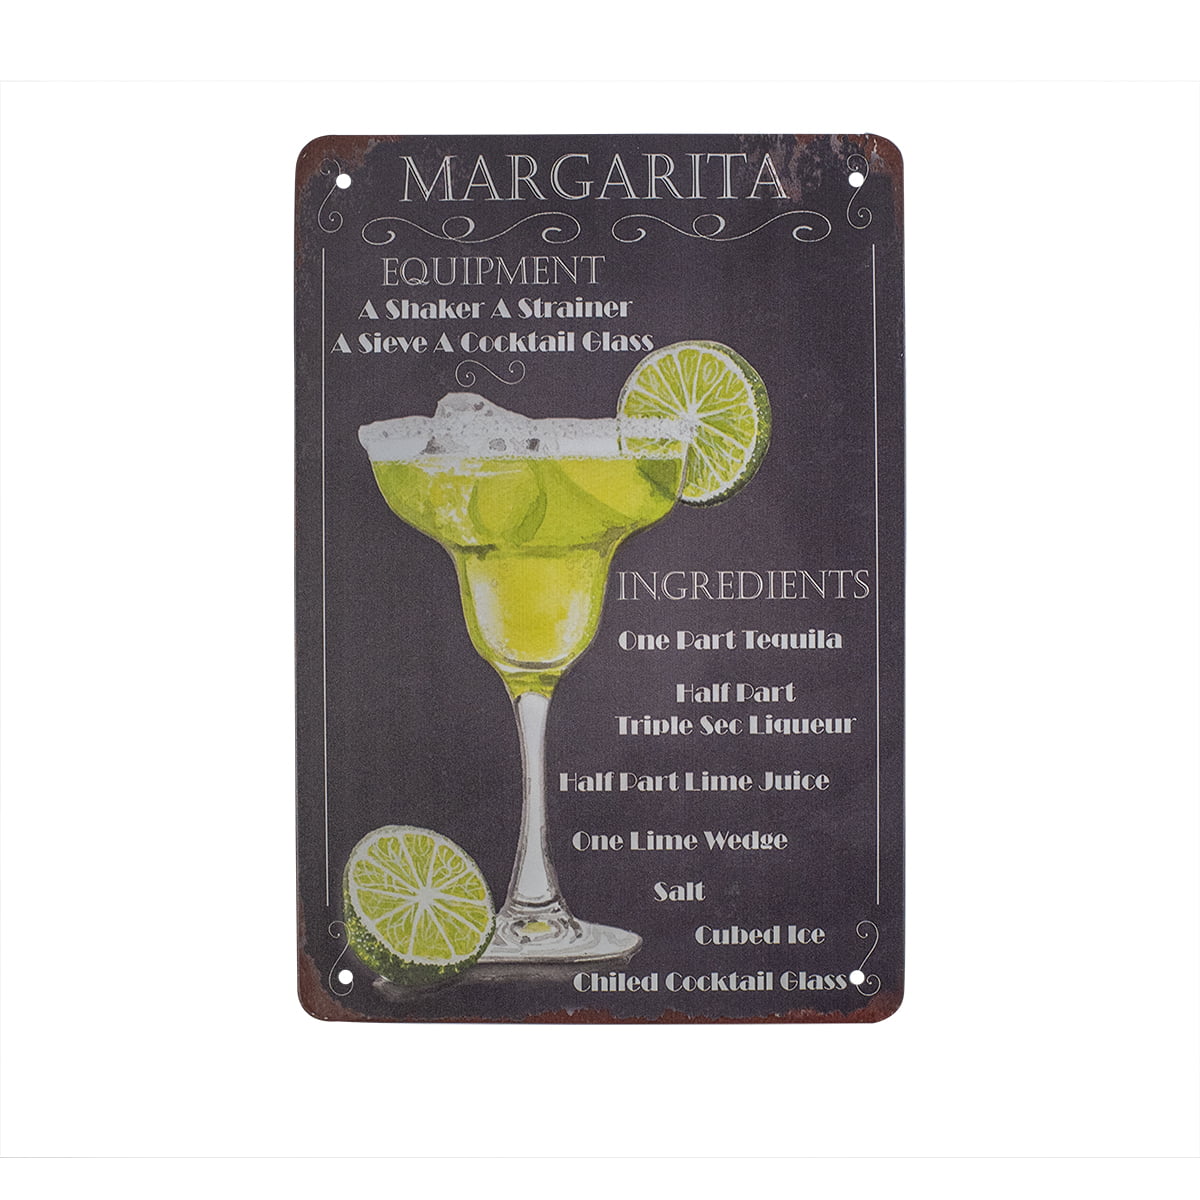 Vintage Art Wall Decor for Plaque Poster Cafe Kitchen Club Man Cave Home Decor for Pub Putuo Decor Margarita Cocktail Bar Sign 12x8 Inches Recipe Metal Sign Gift